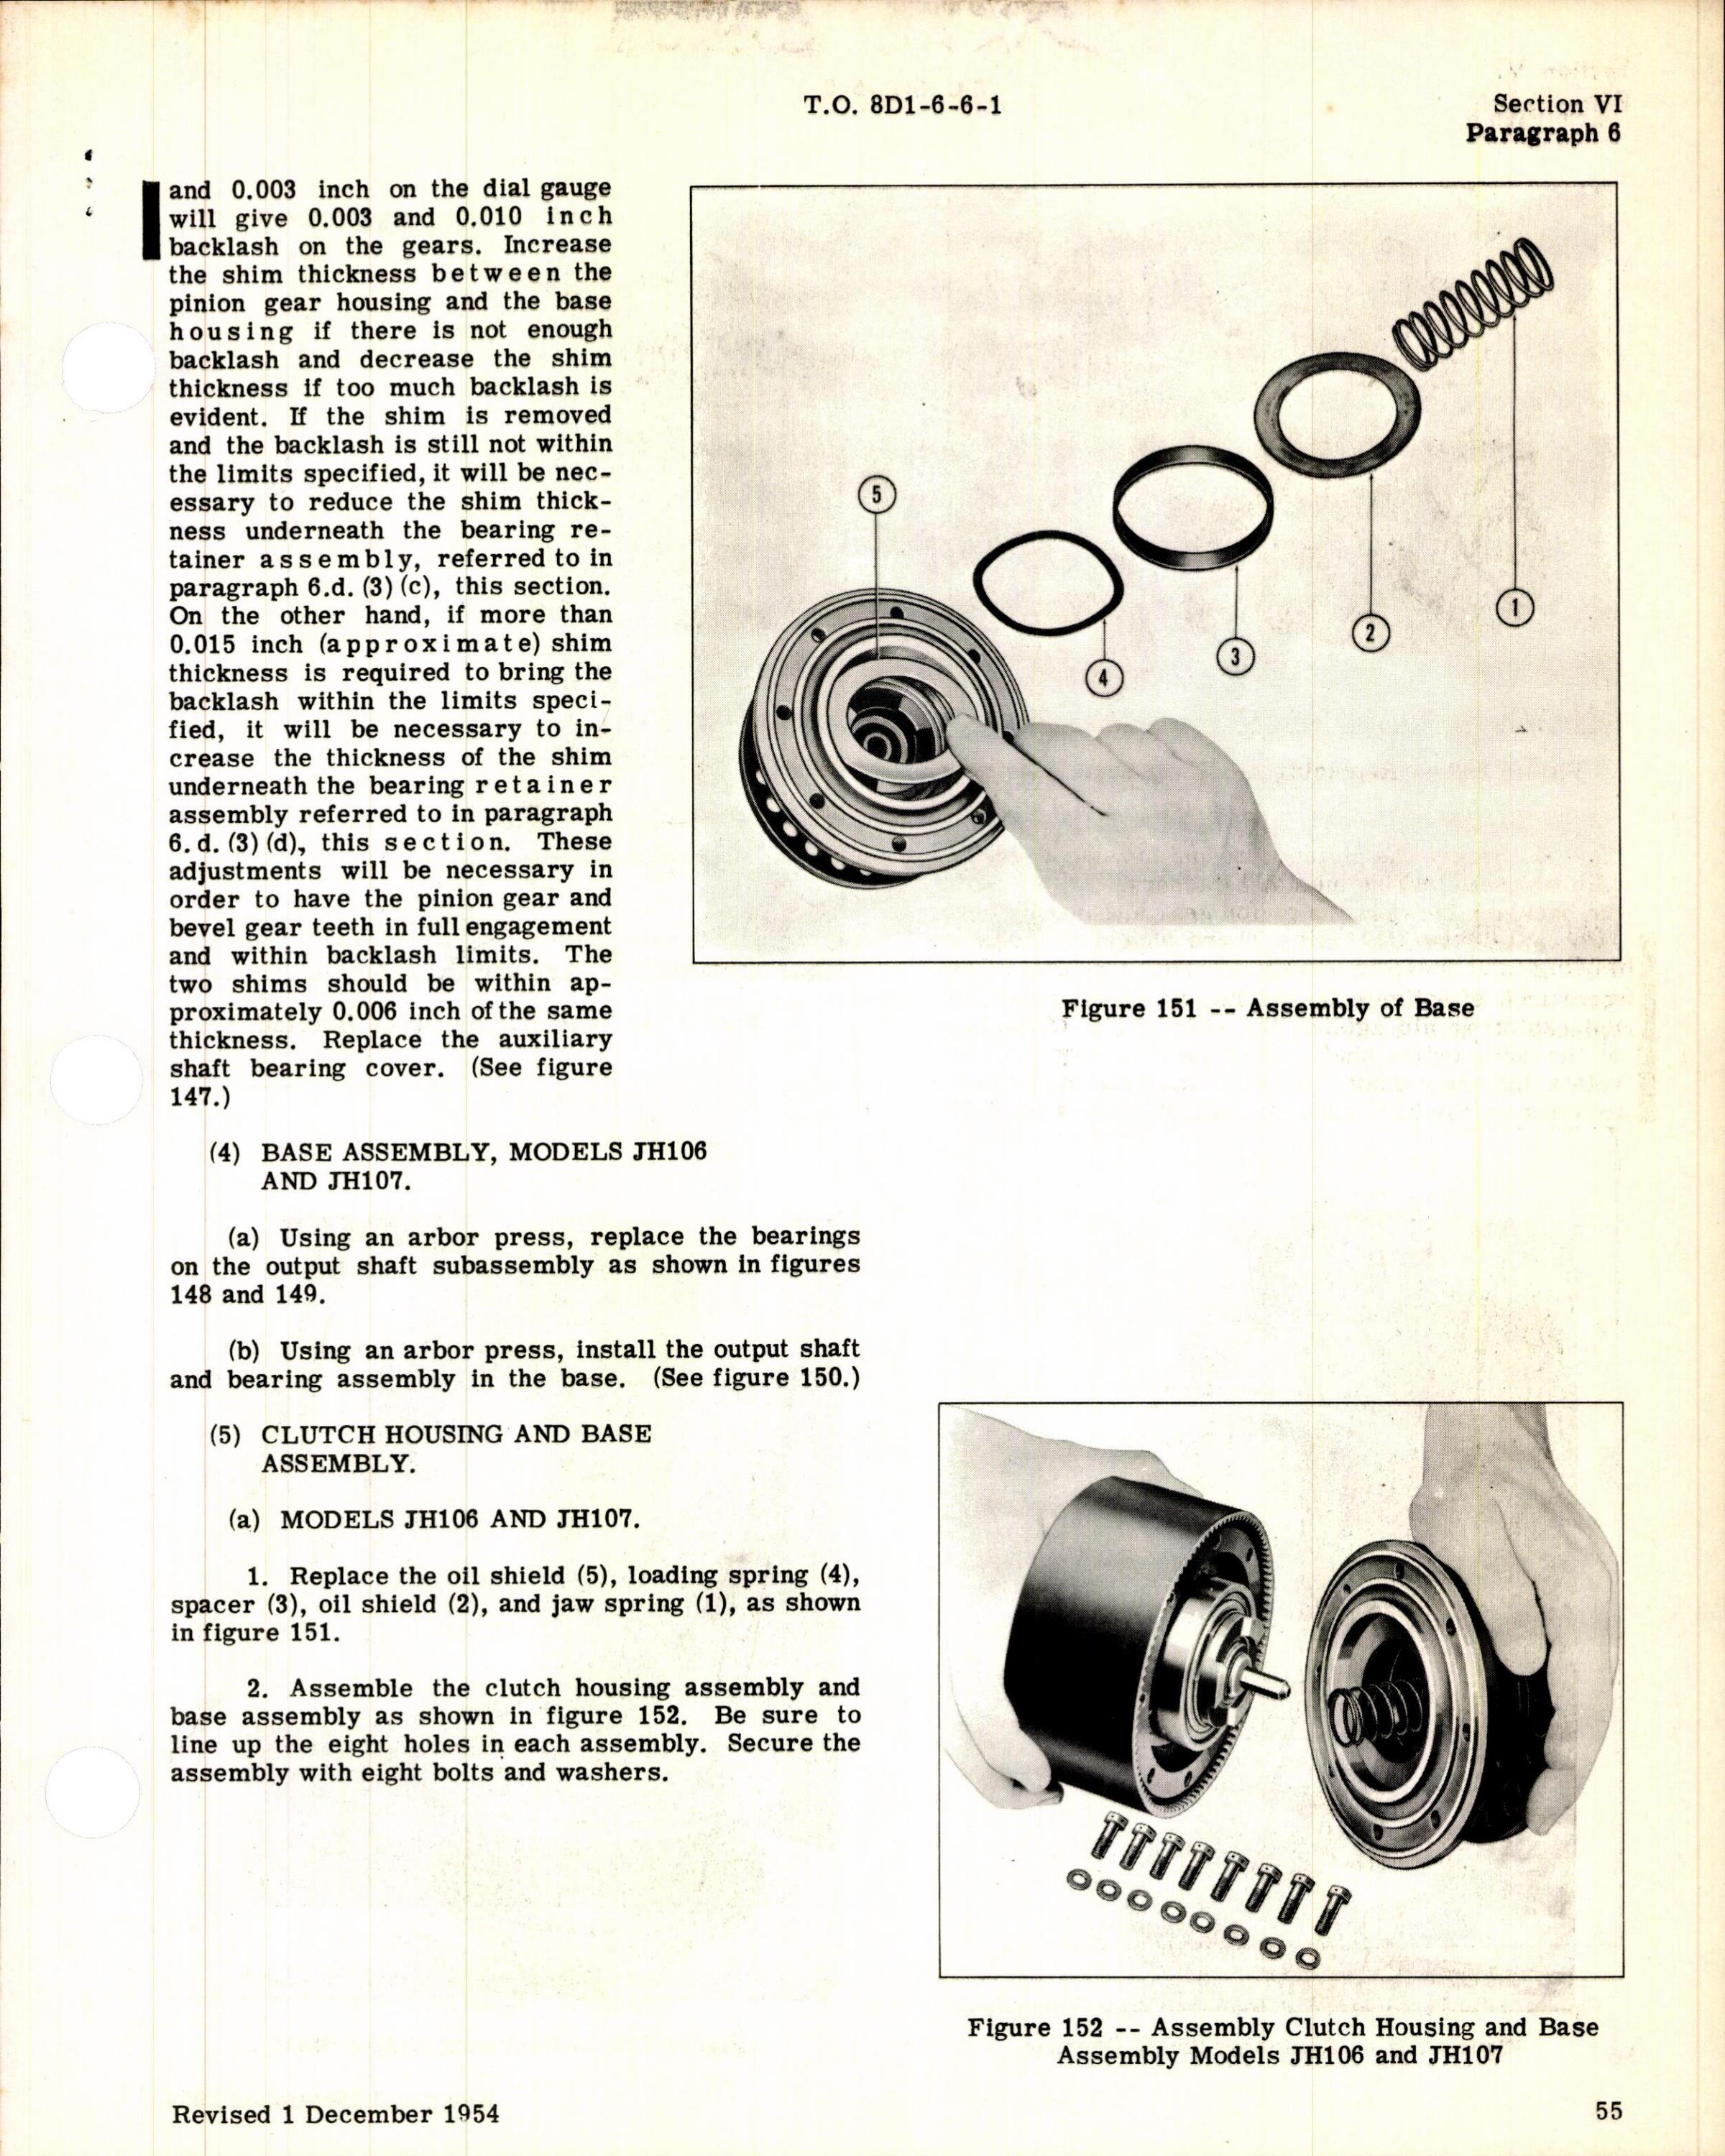 Sample page 5 from AirCorps Library document: Operation, Service, & Overhaul Instructions with Parts Catalog for Retracting Motors